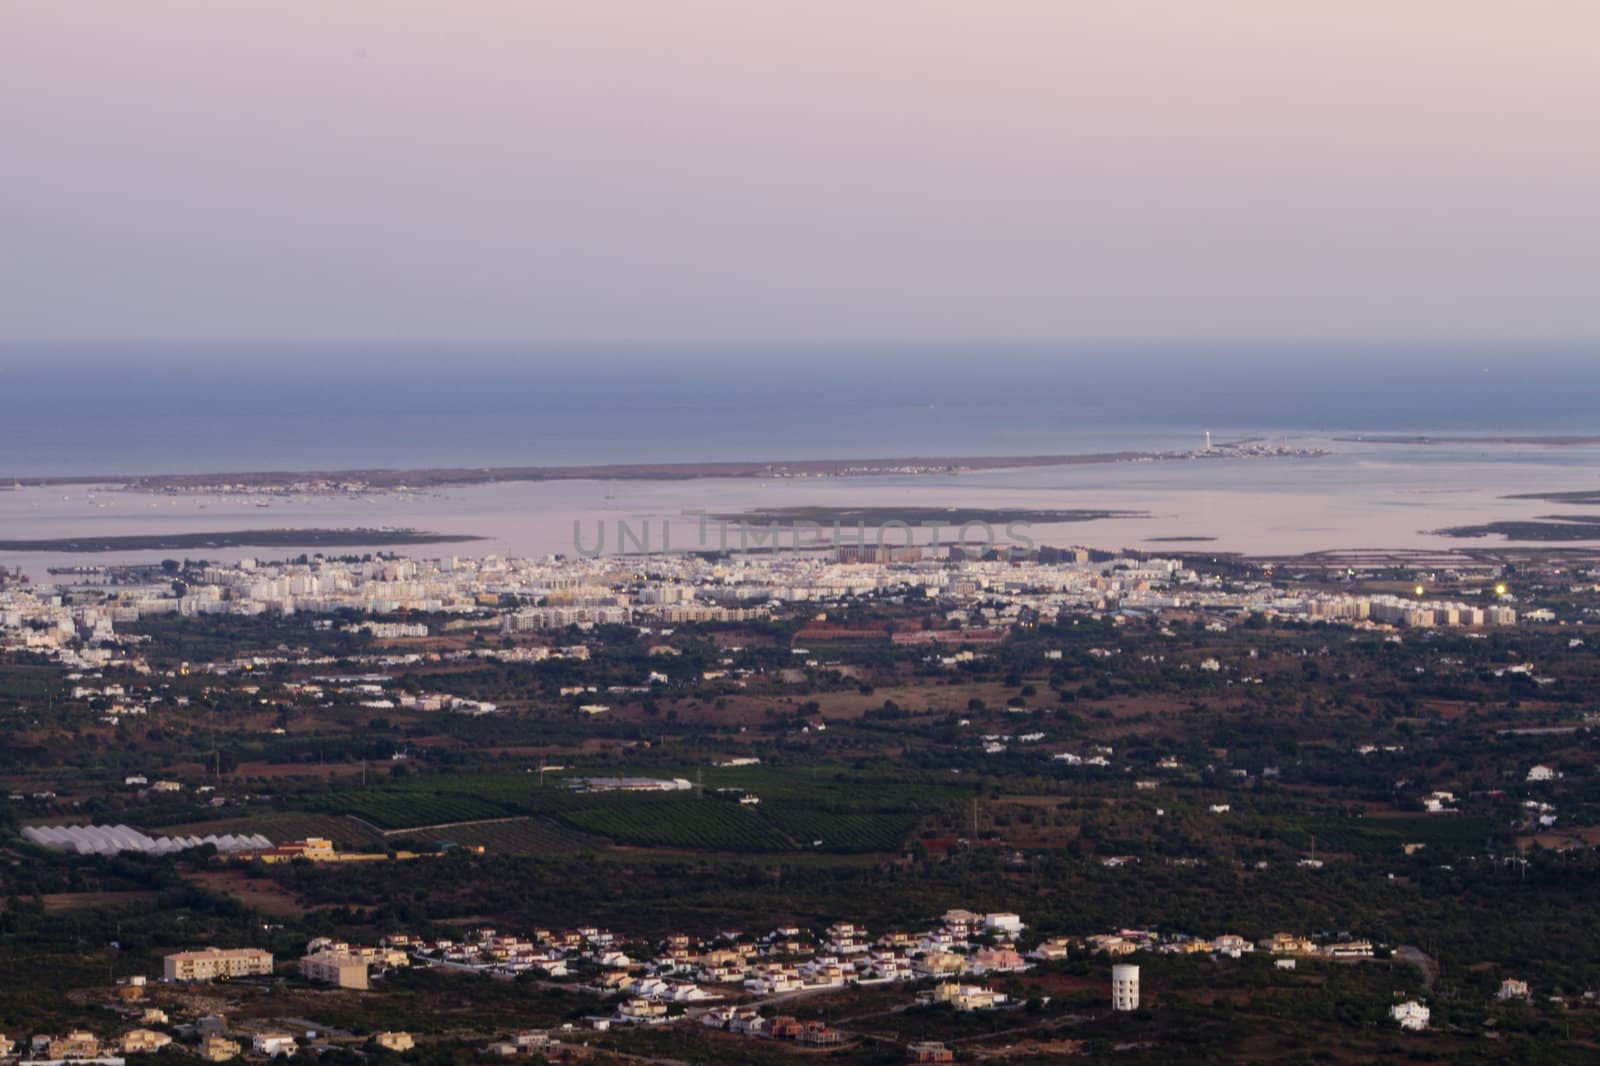 Wide view of the area of Faro city, located on the Algarve, Portugal at sunset.